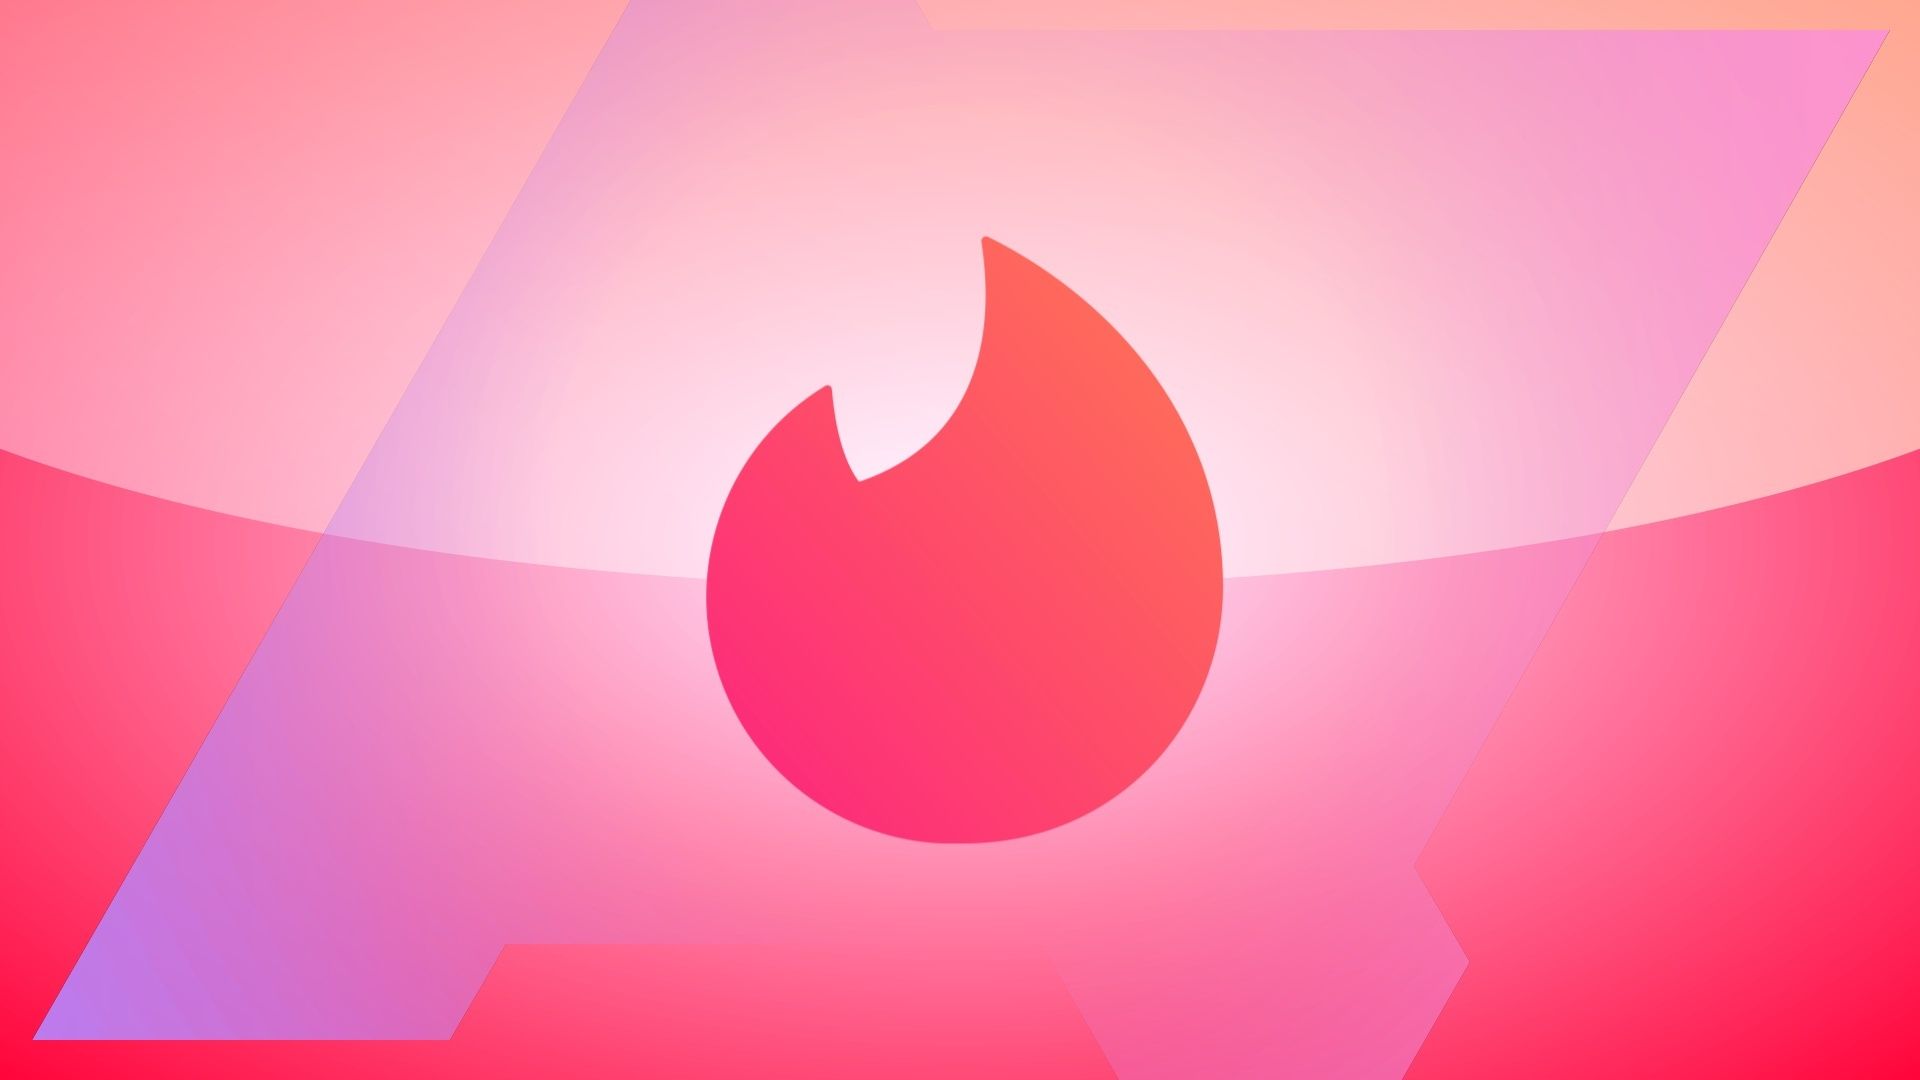 Tinder logo over an Android Police logo set on a gradient background 